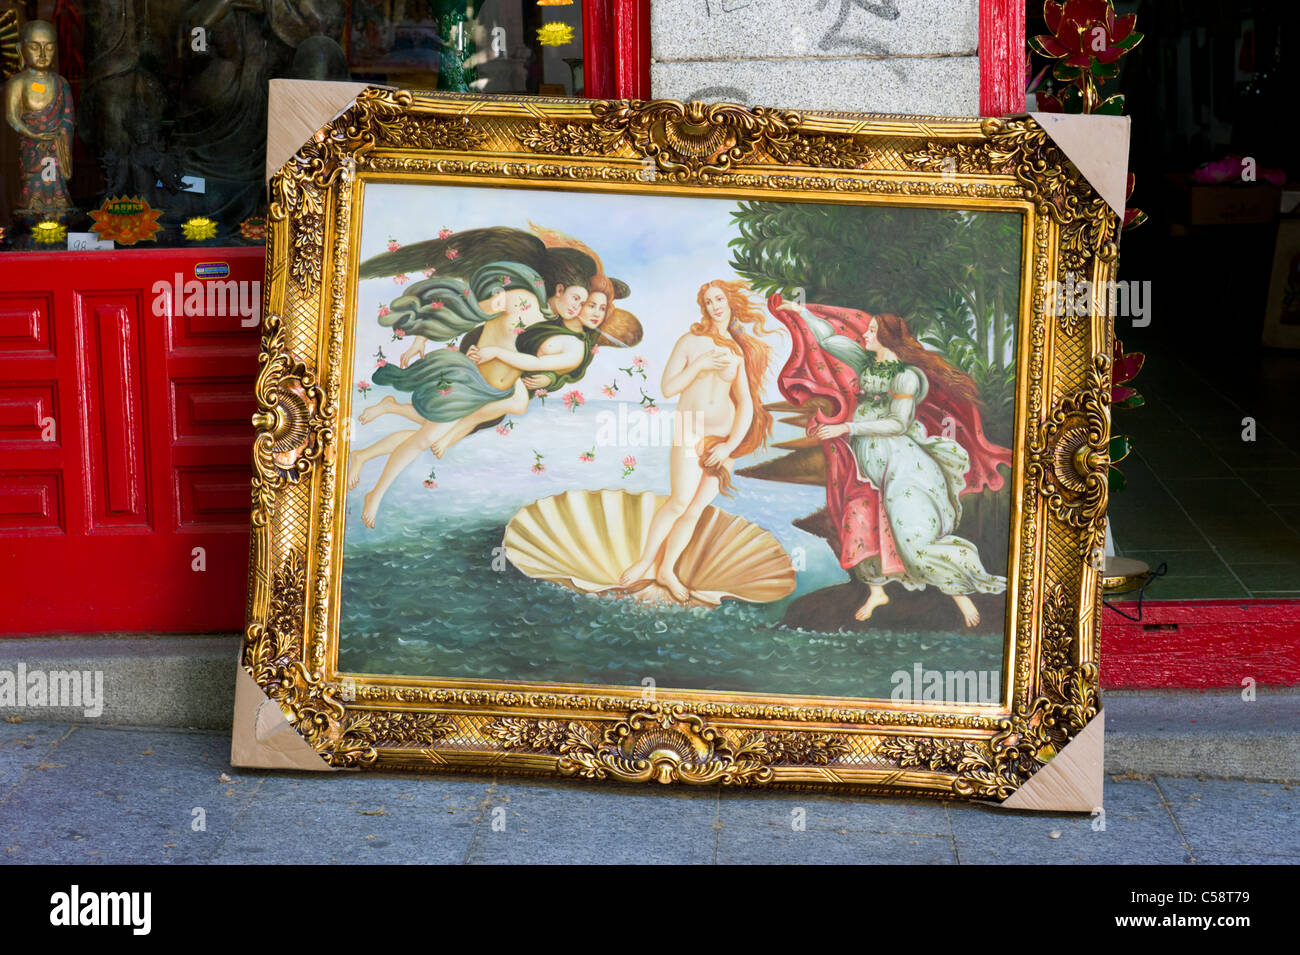 Chinese hand painted copy of the Birth of Venus by Botticelli at El Rastro market, Madrid, Spain Stock Photo